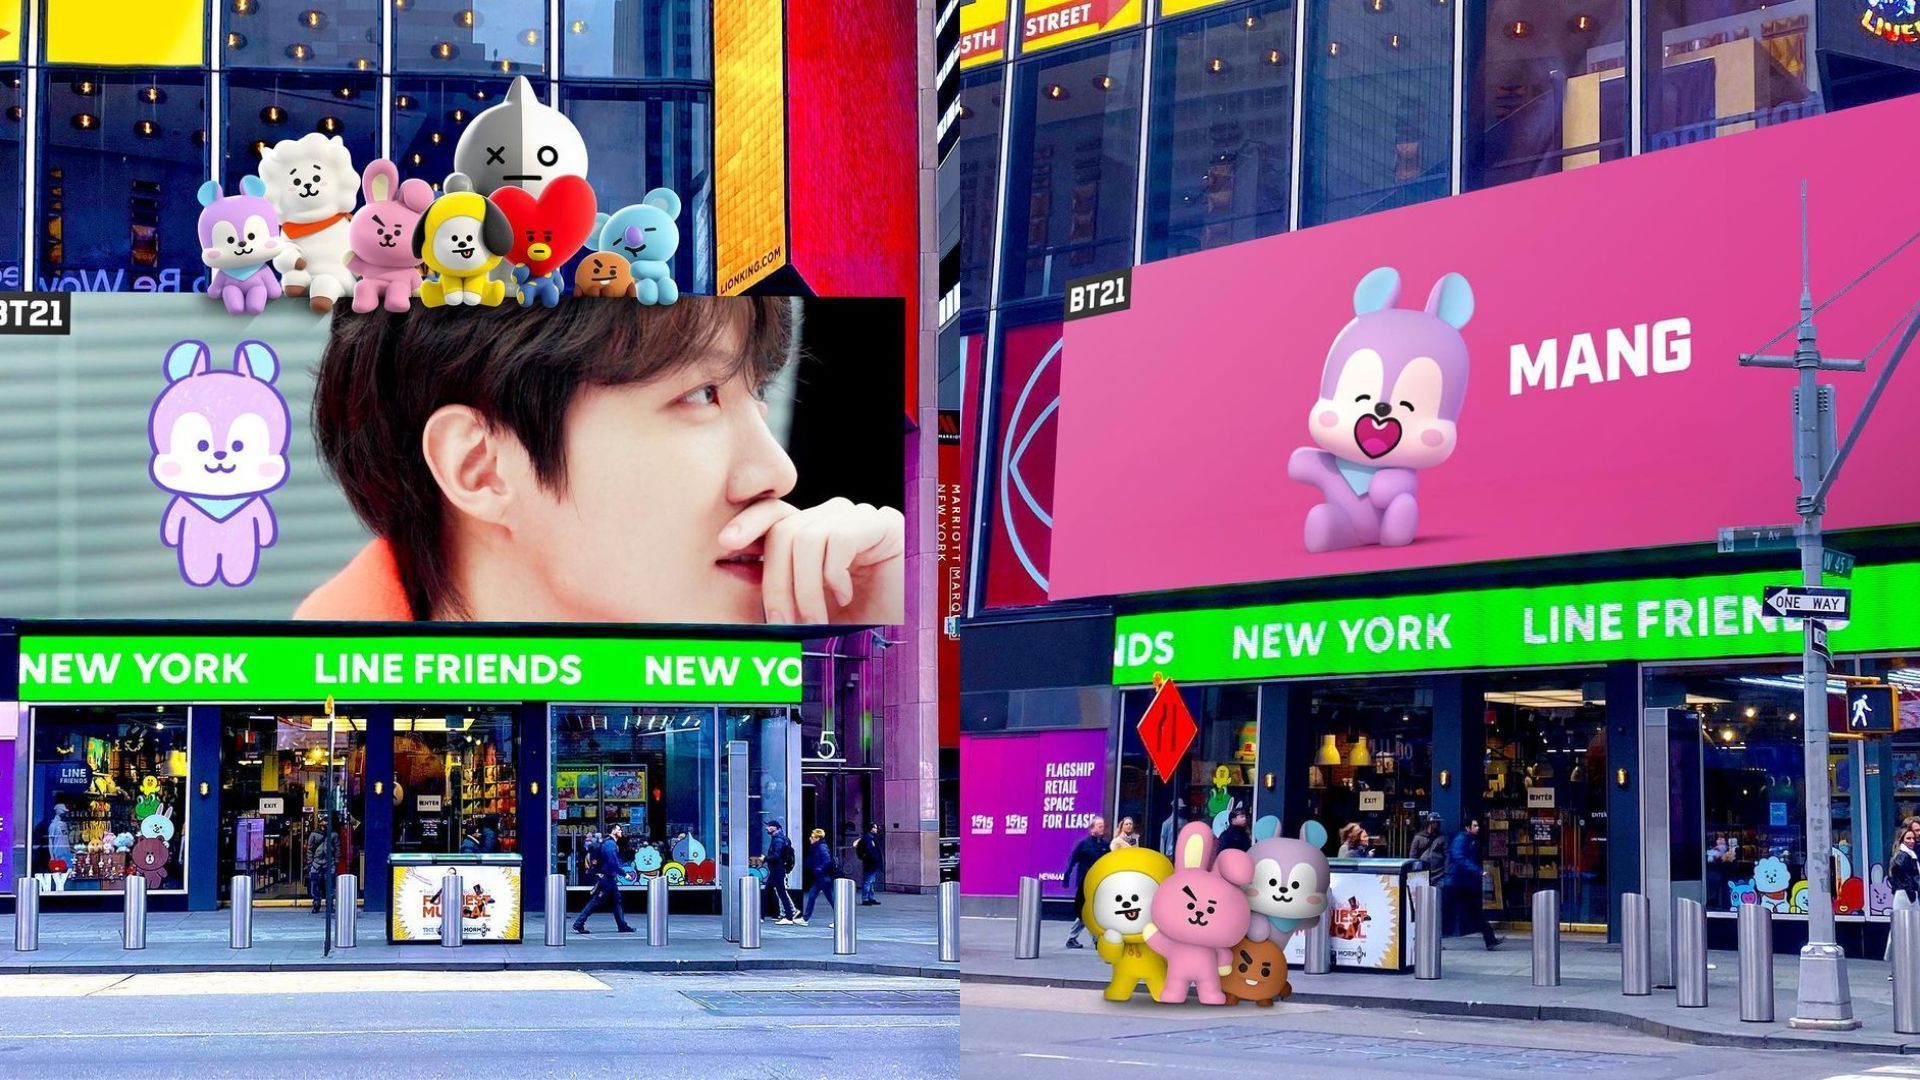 BT21 store in new york